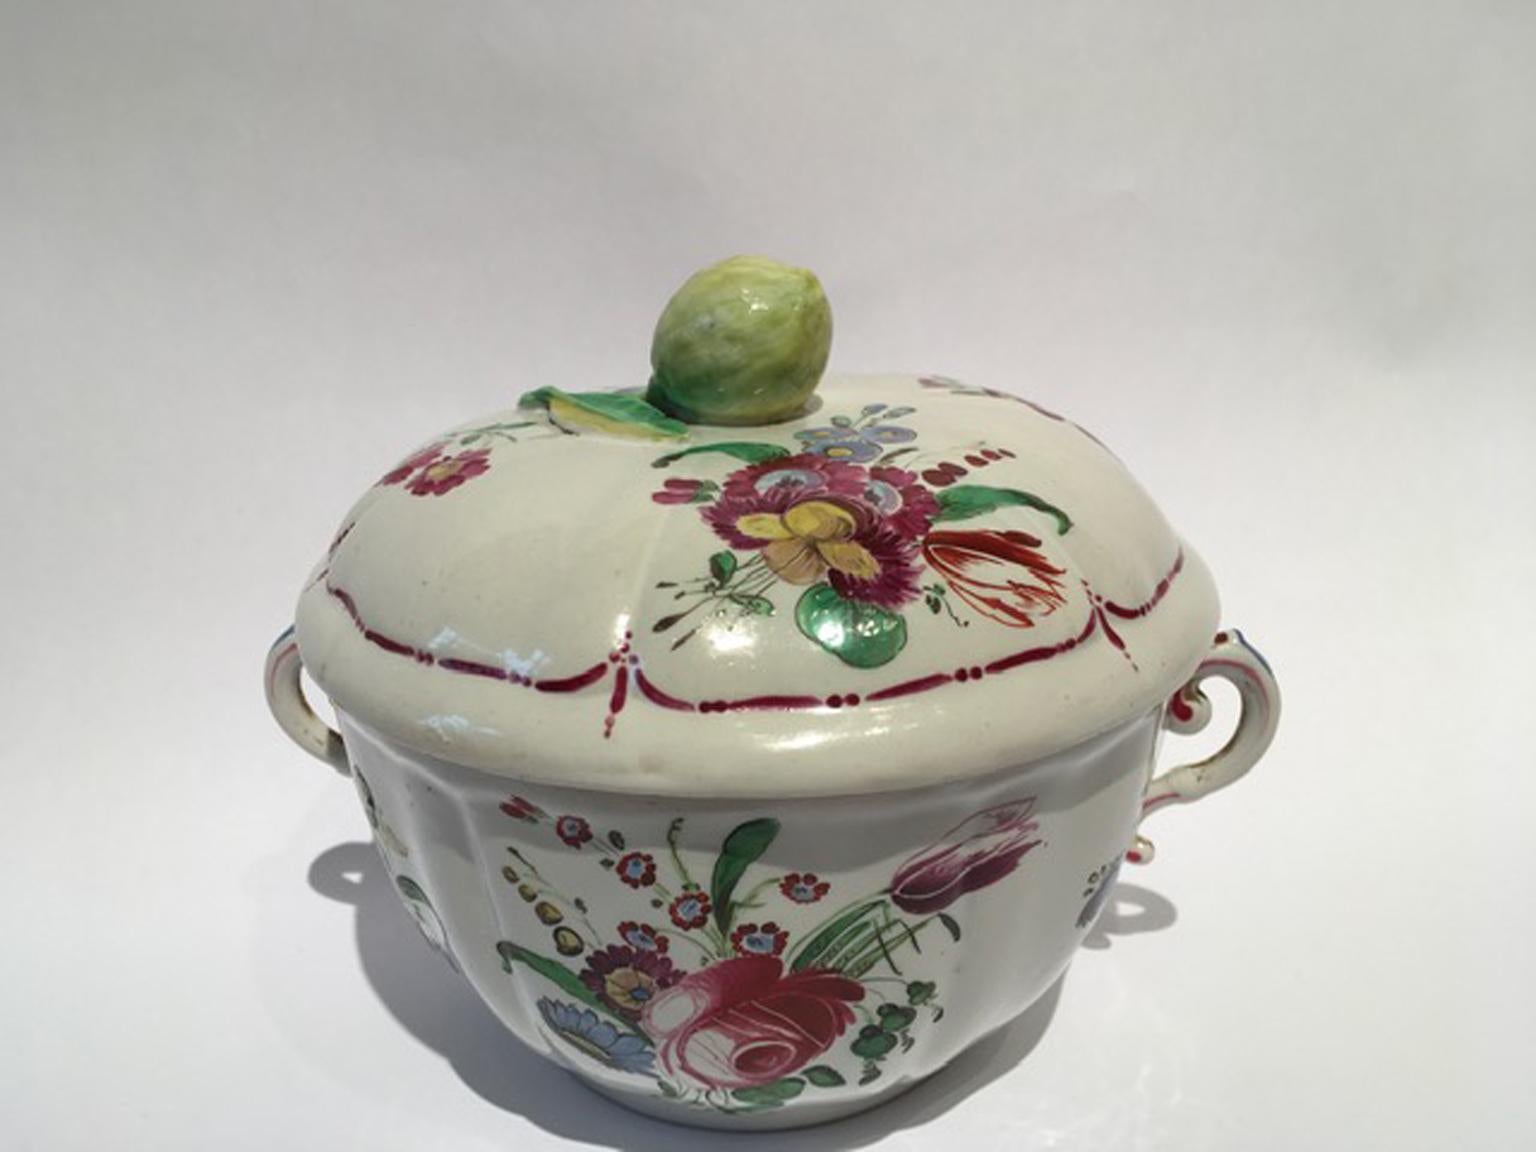 Italy 18th Century Richard Ginori Porcelain Sugar Bowl with Floral Drawings 7